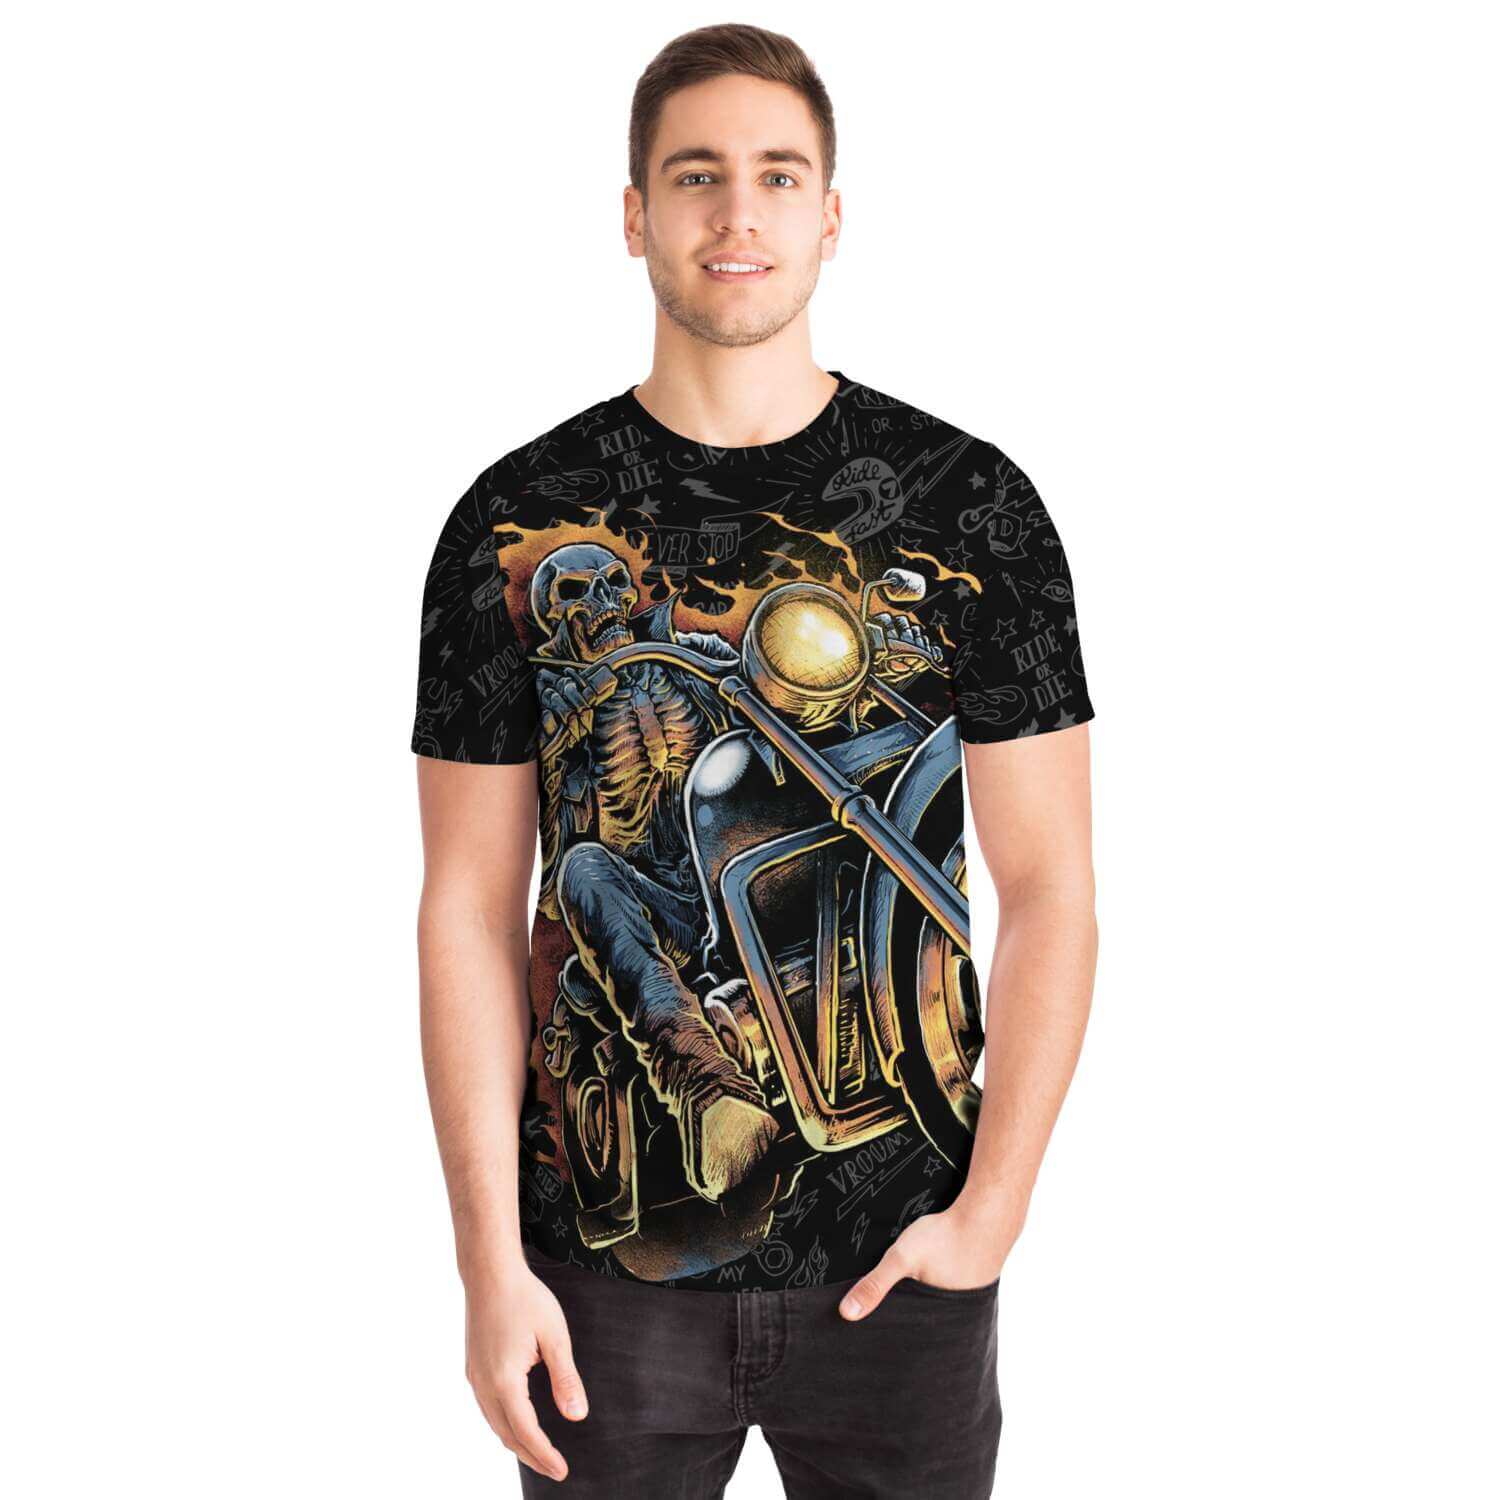 Burning-Skull-Motorcycle-T-Shirt-male-front